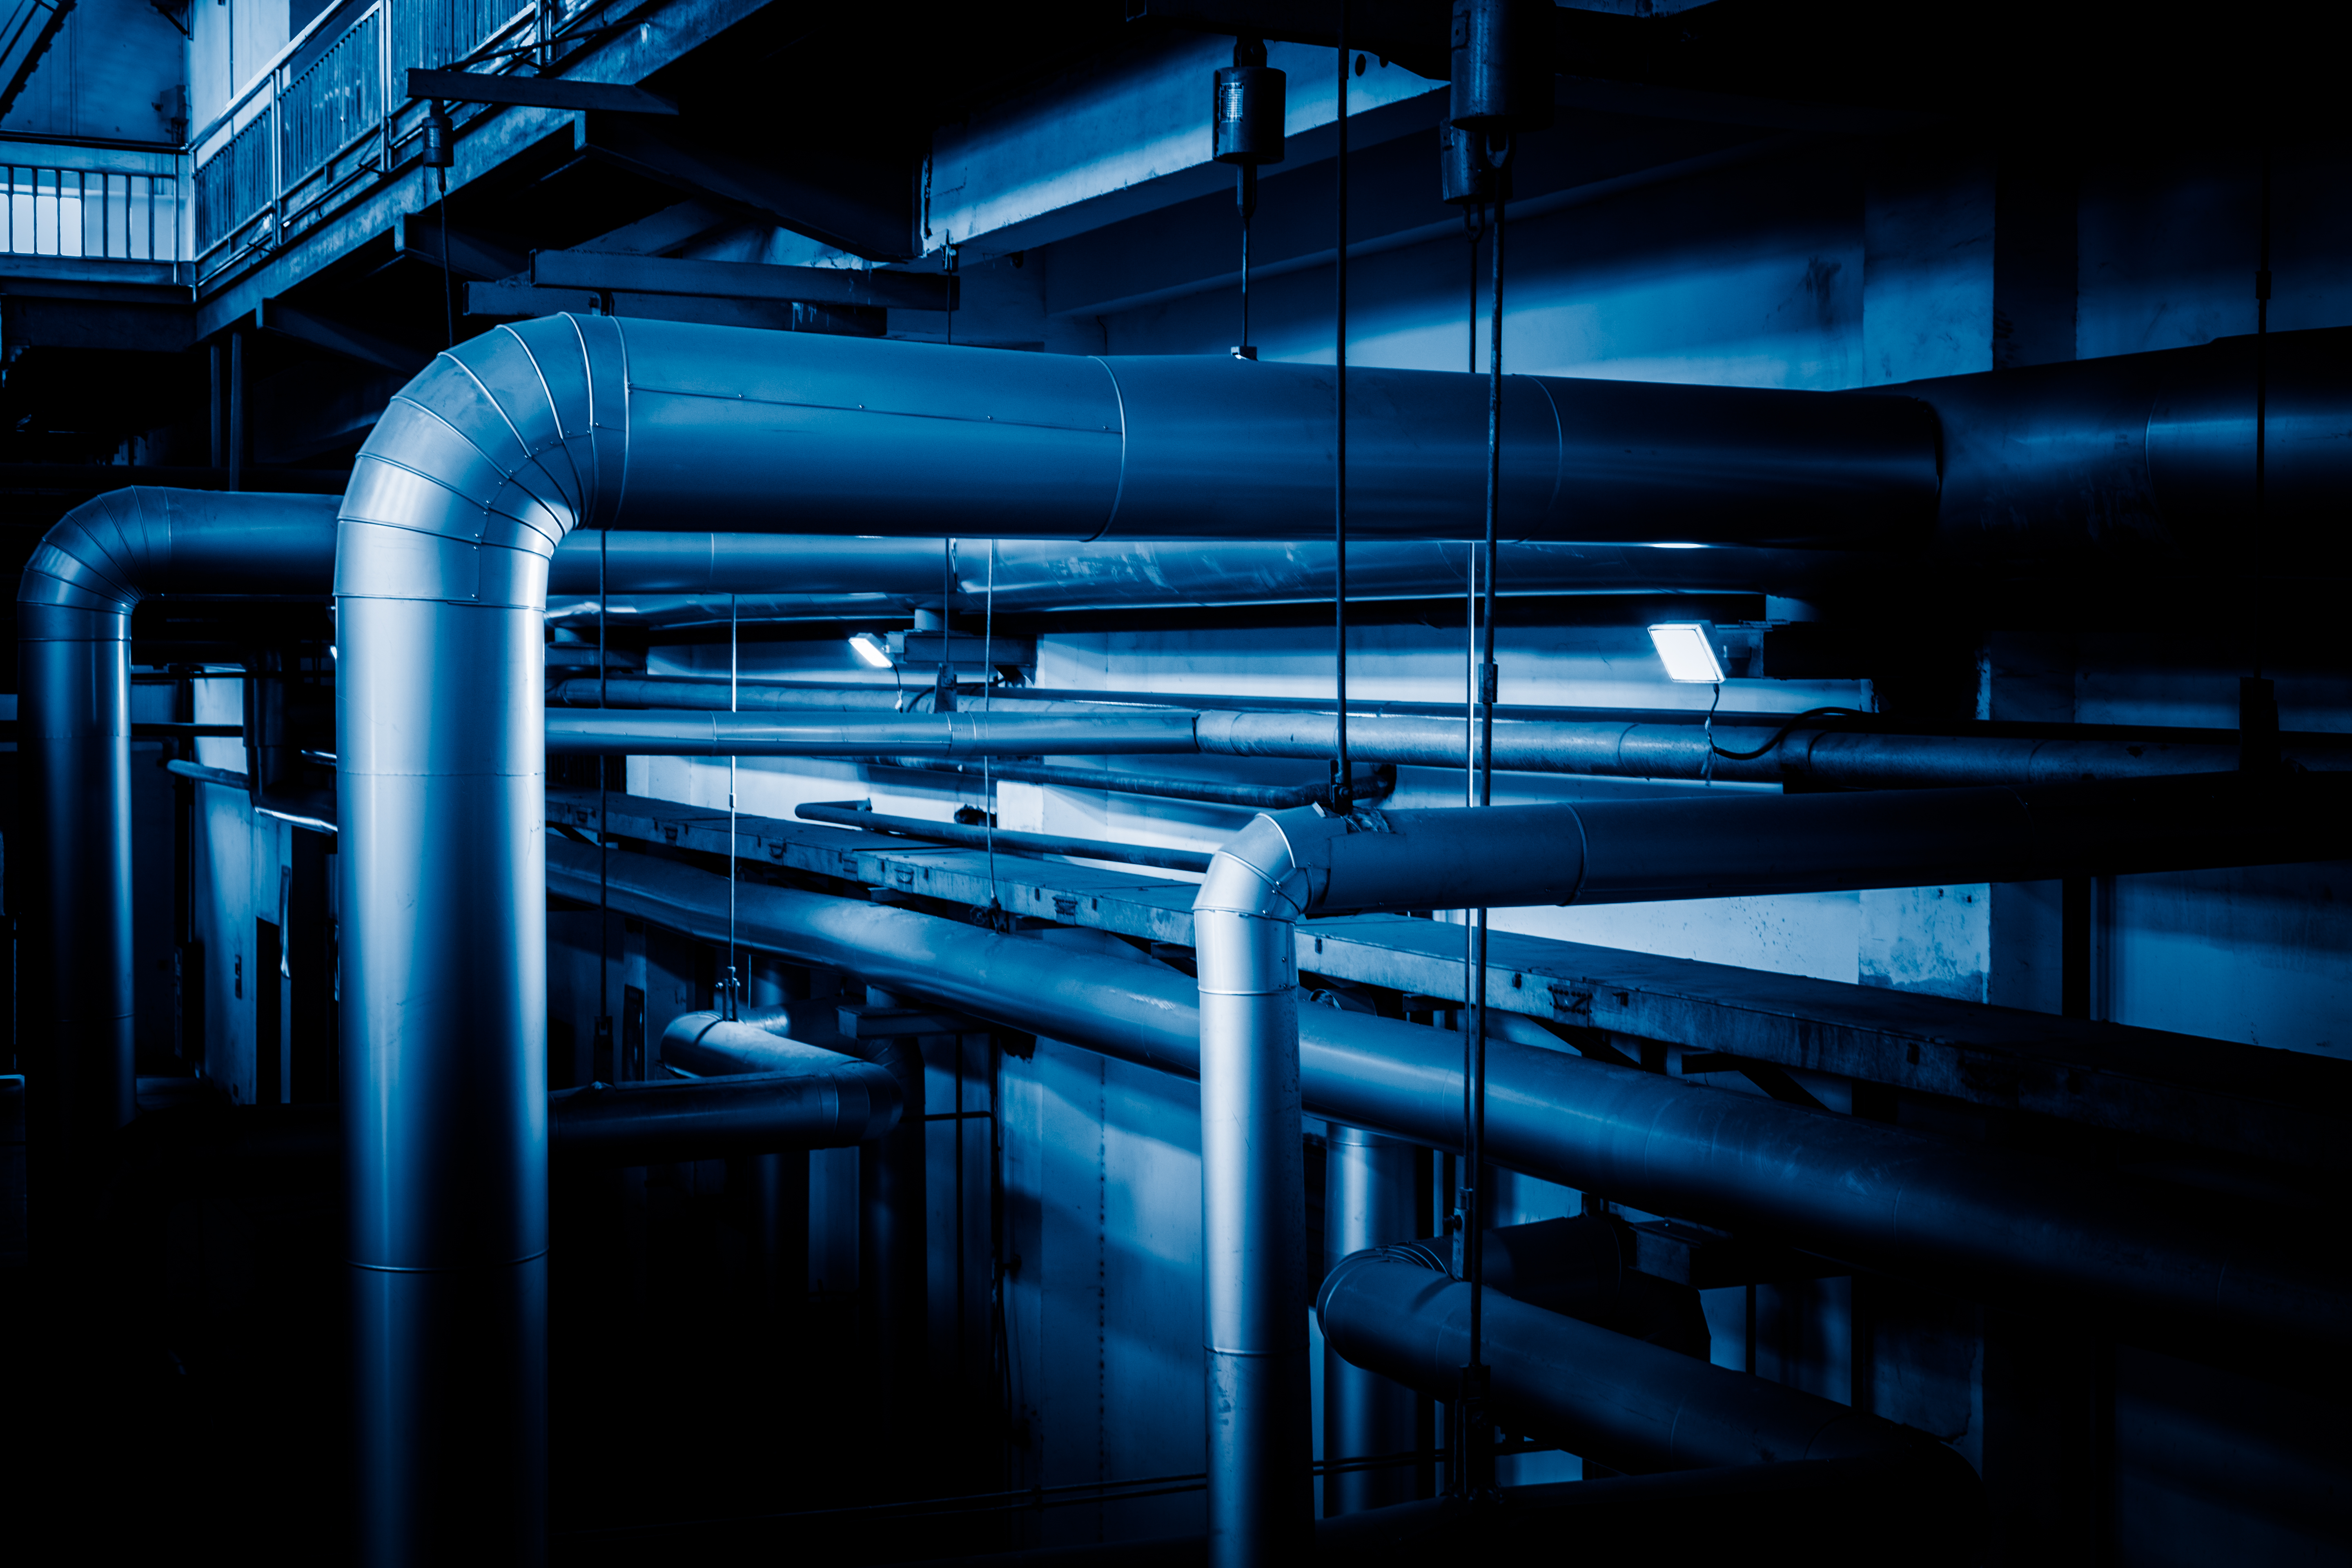 Get in line with local regulation in HVAC by using technical insulation